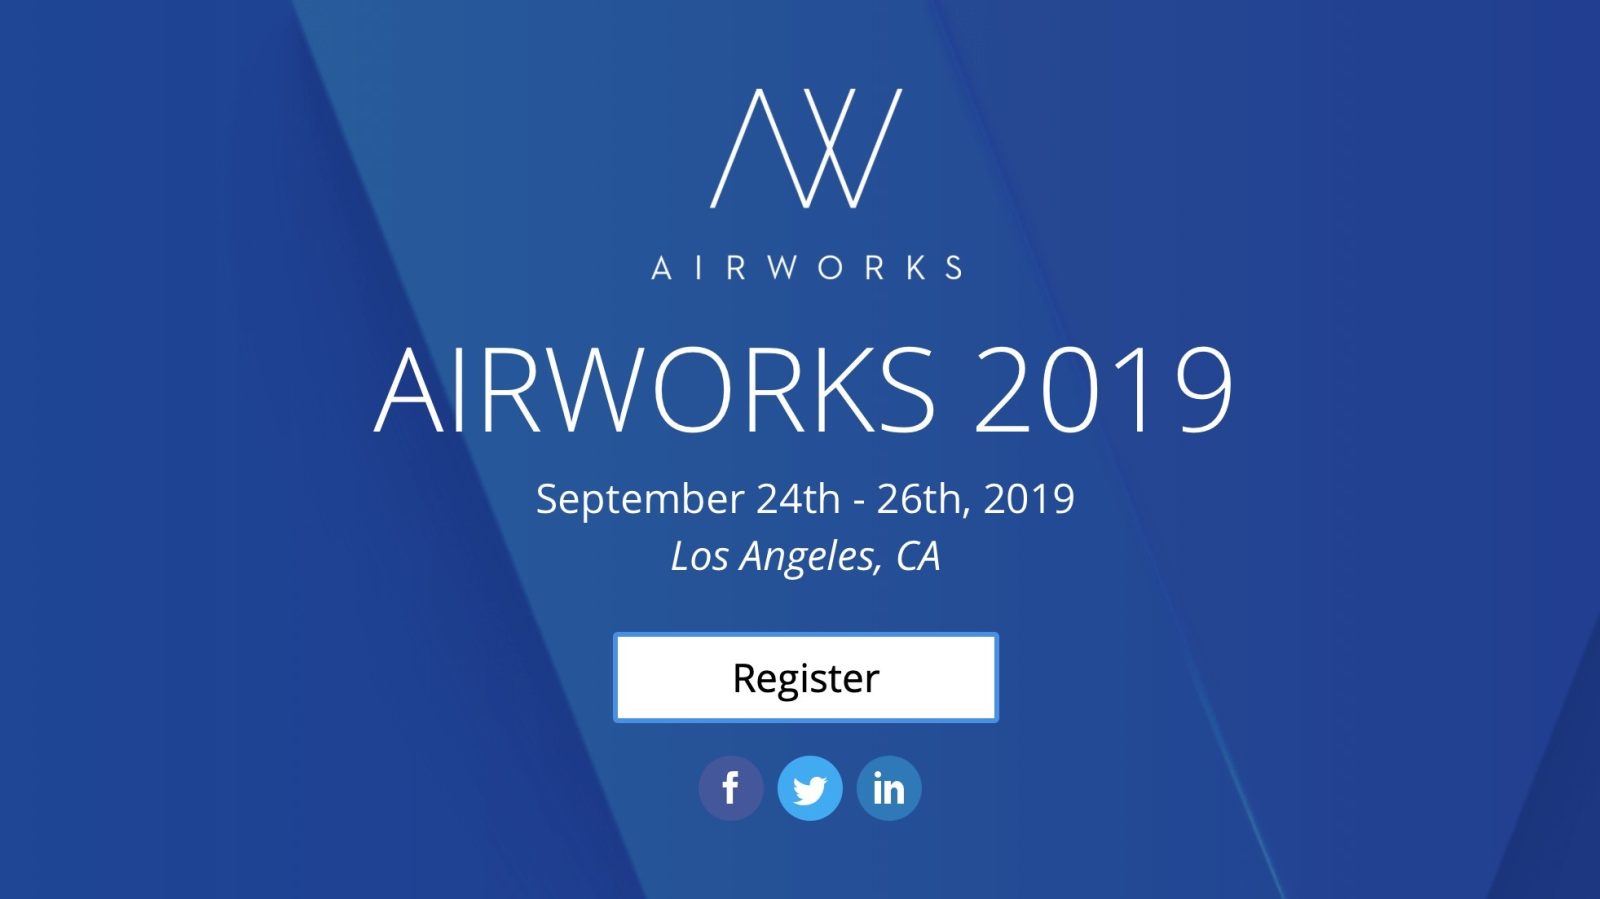 DJI Airworks will take place on September 24th - 26th in Los Angeles, CA